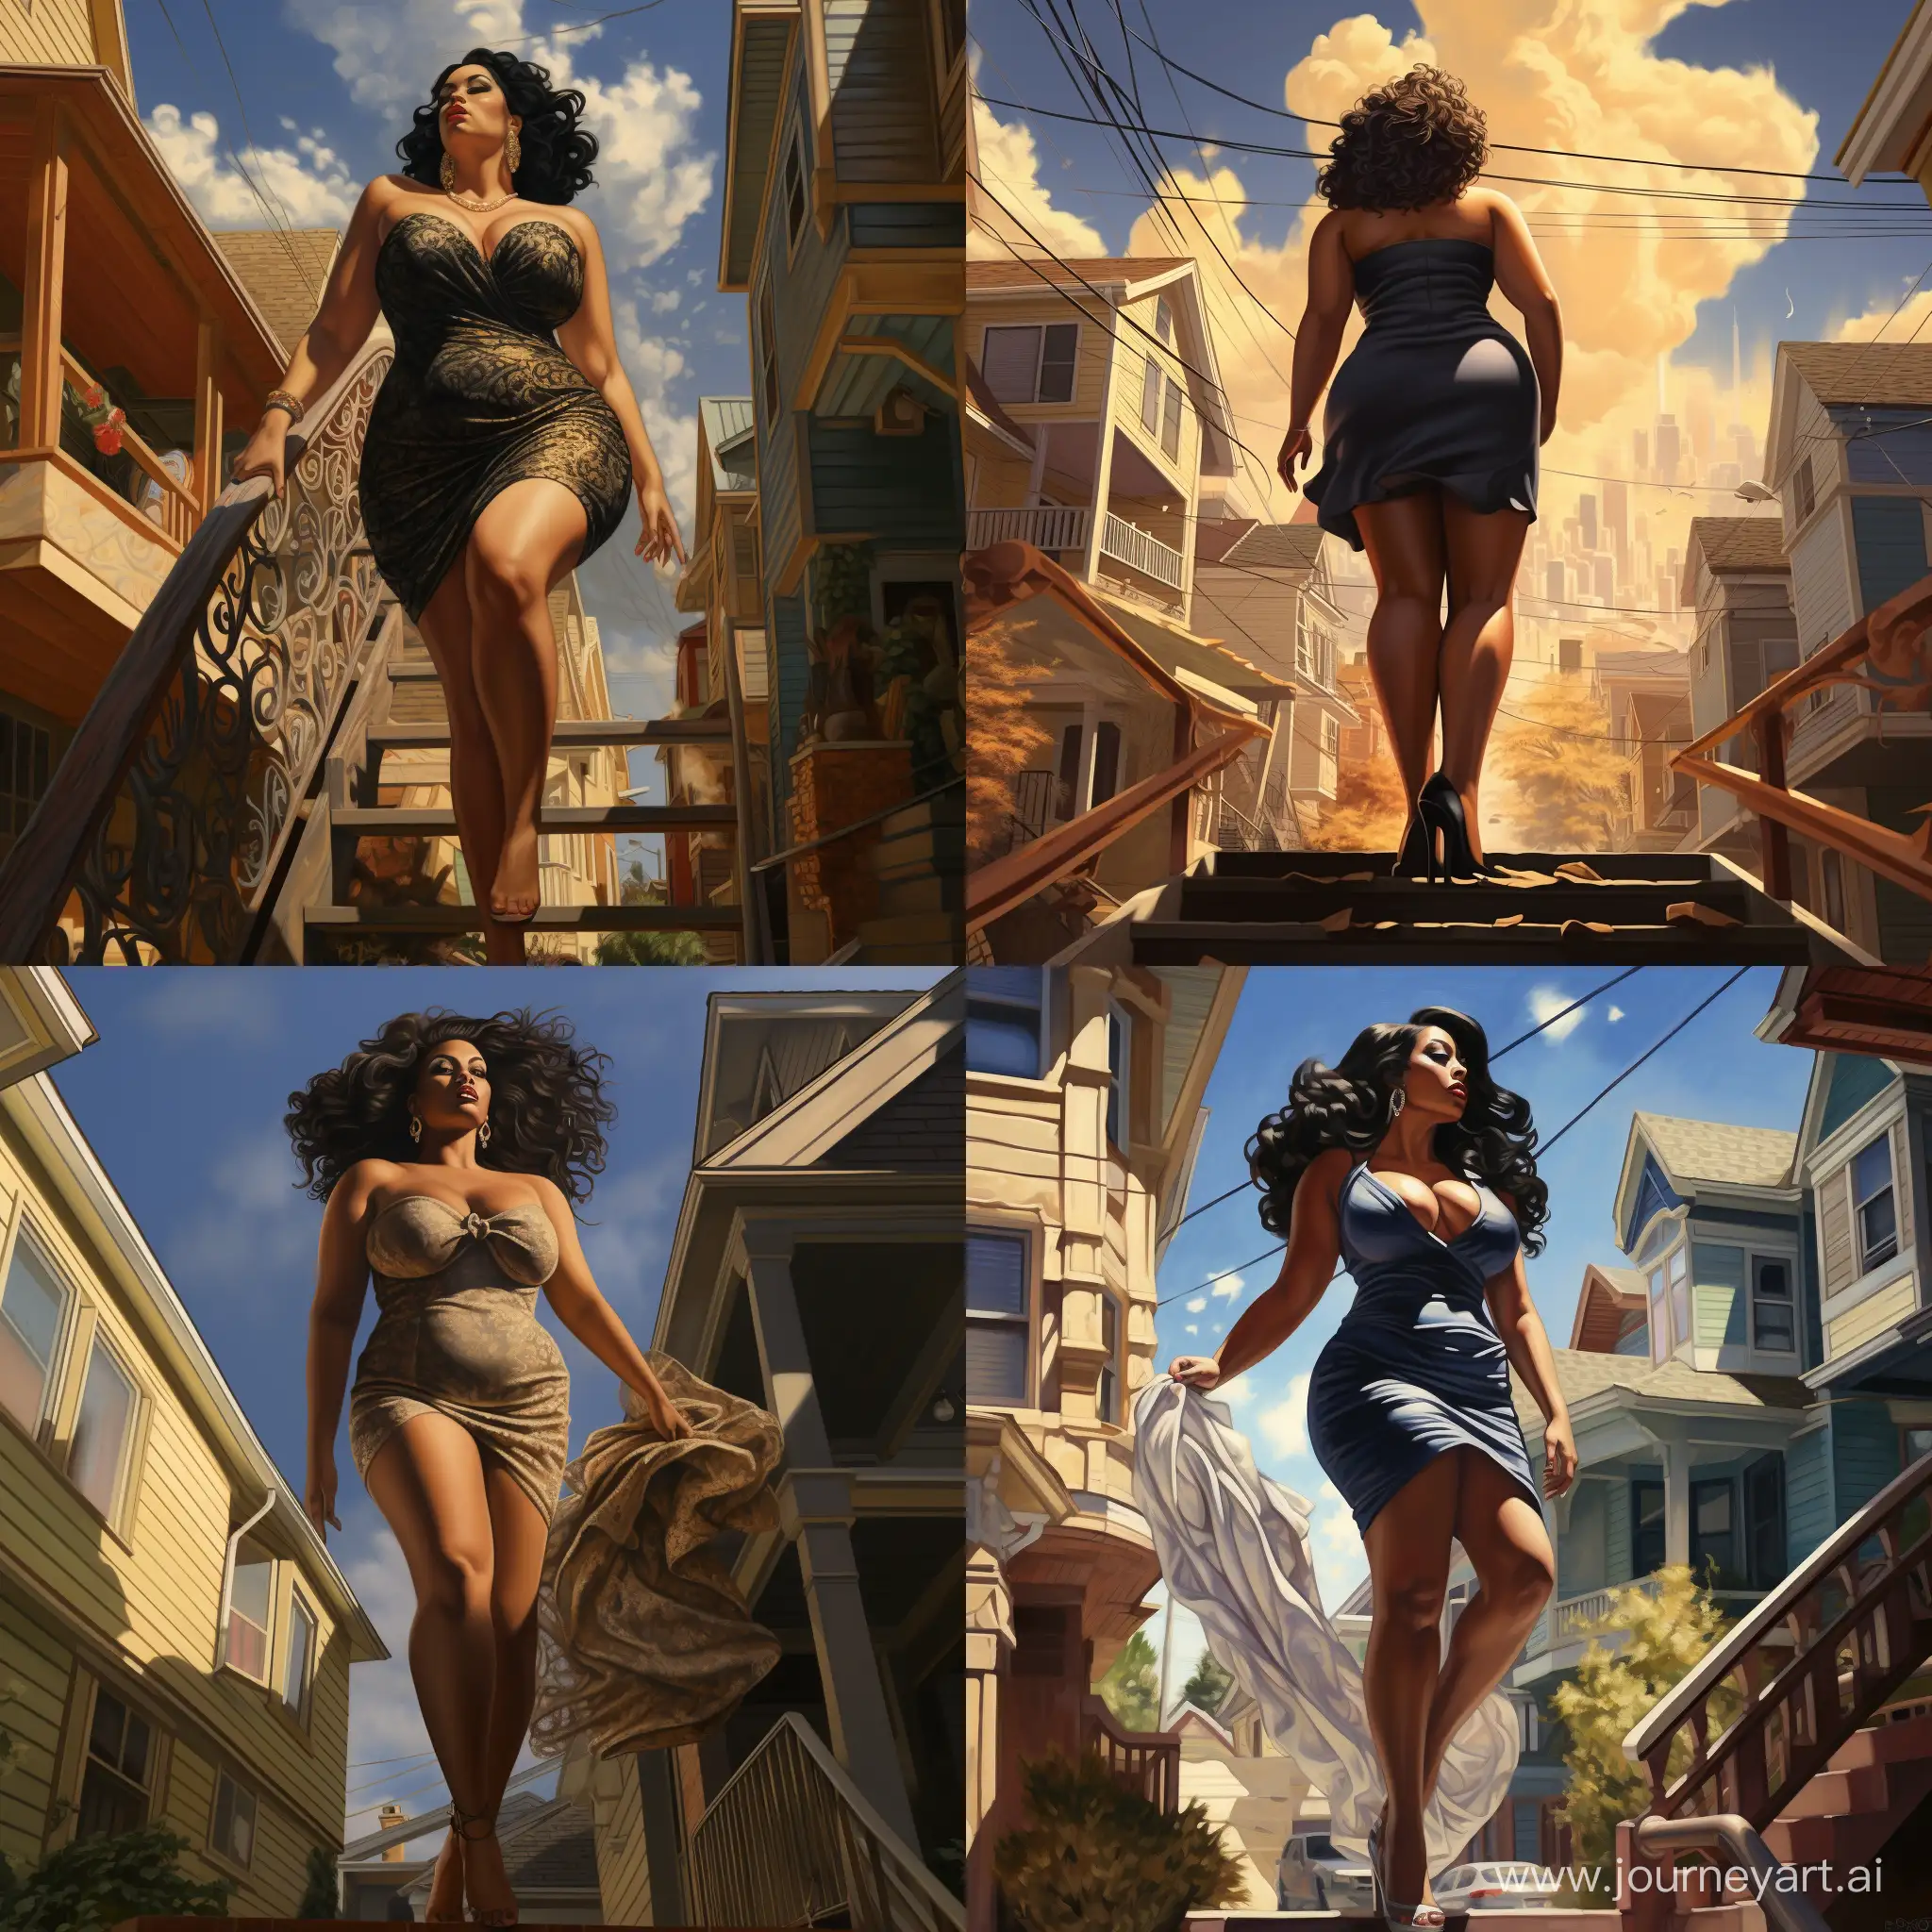 Giant-PlusSized-Woman-Rampages-Through-Neighborhood-in-Elegant-Stride